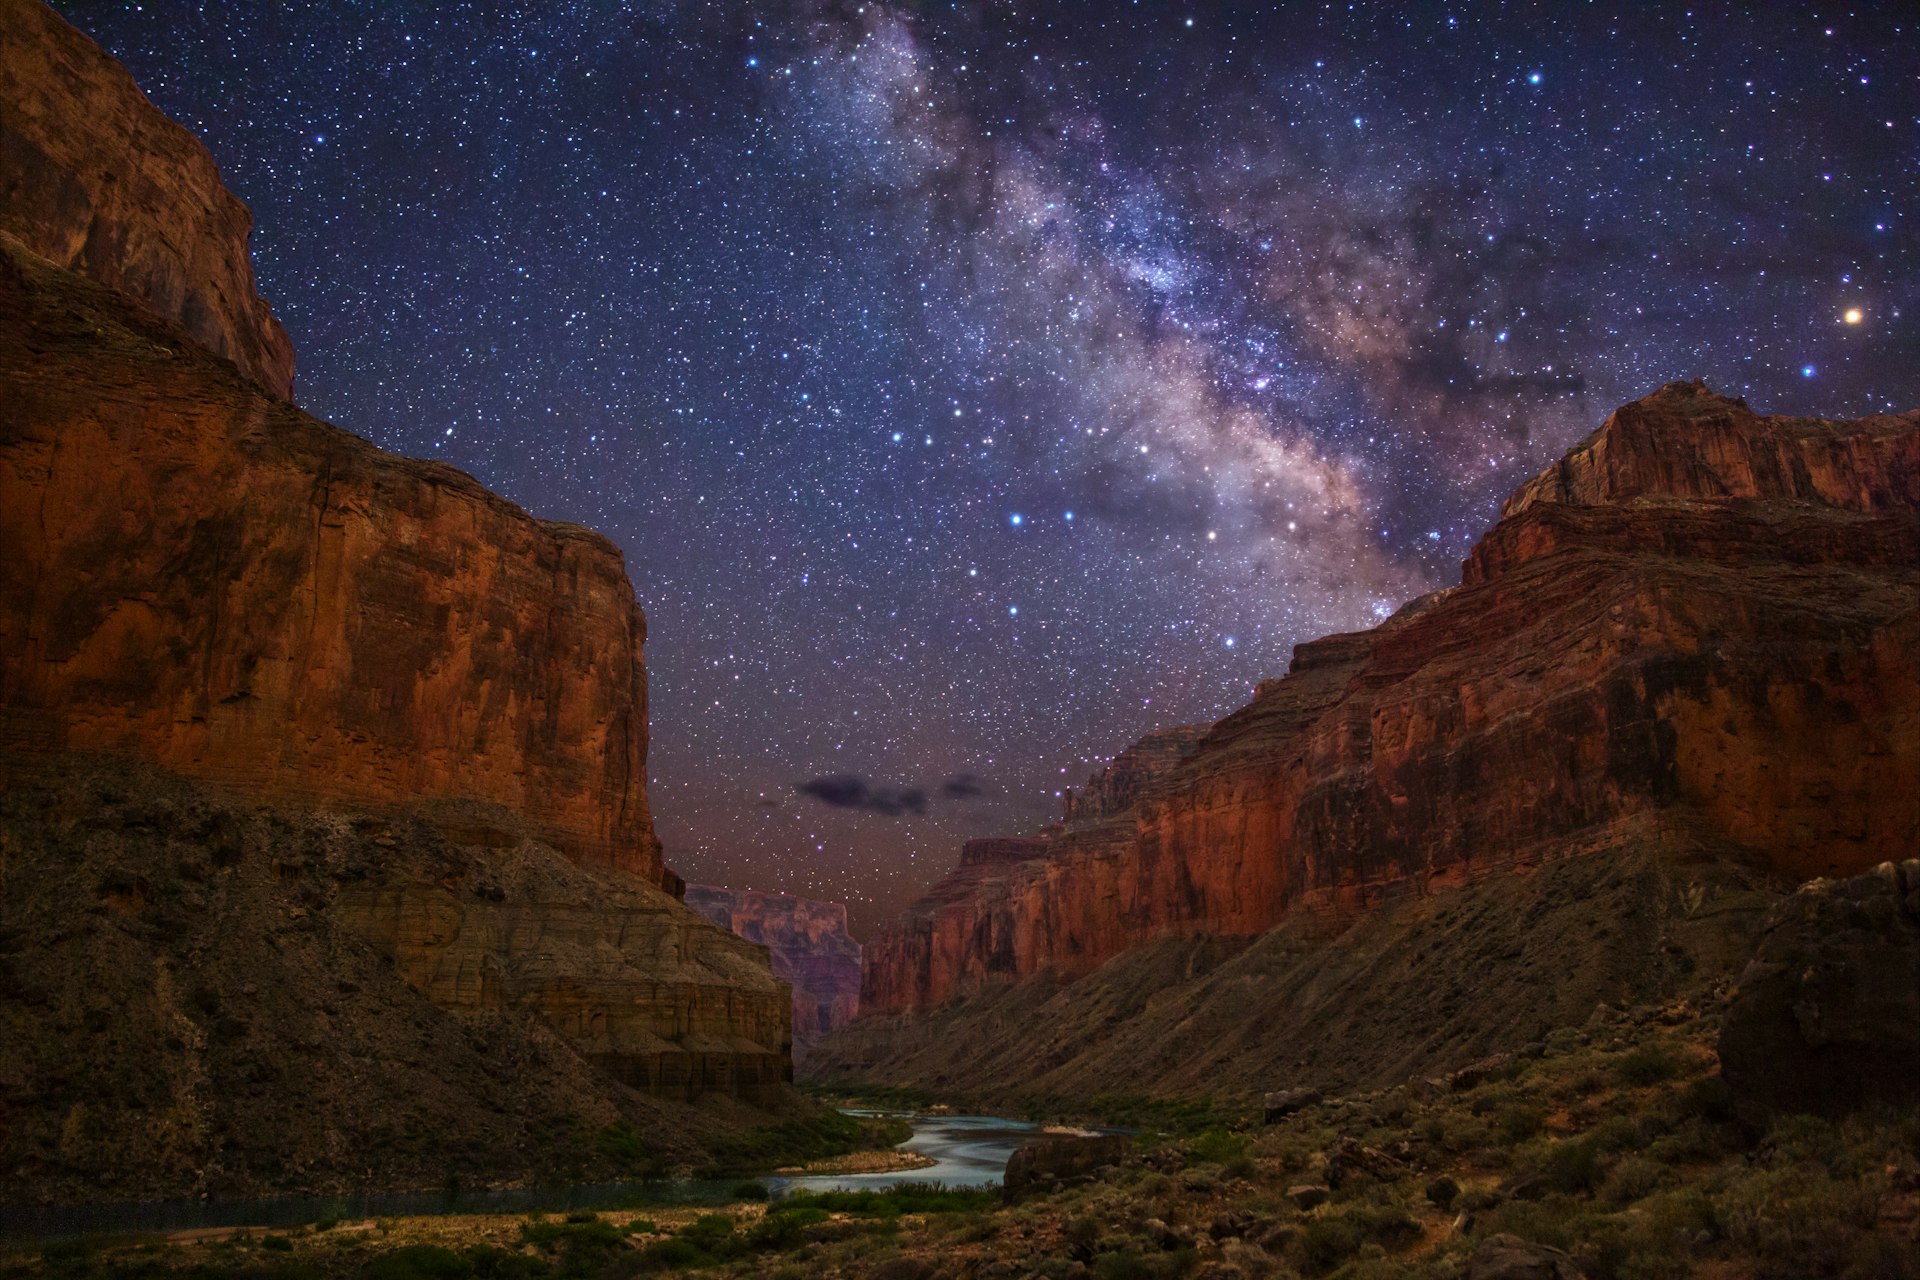 A view of the Milky Way from the bottom of a deep canyon